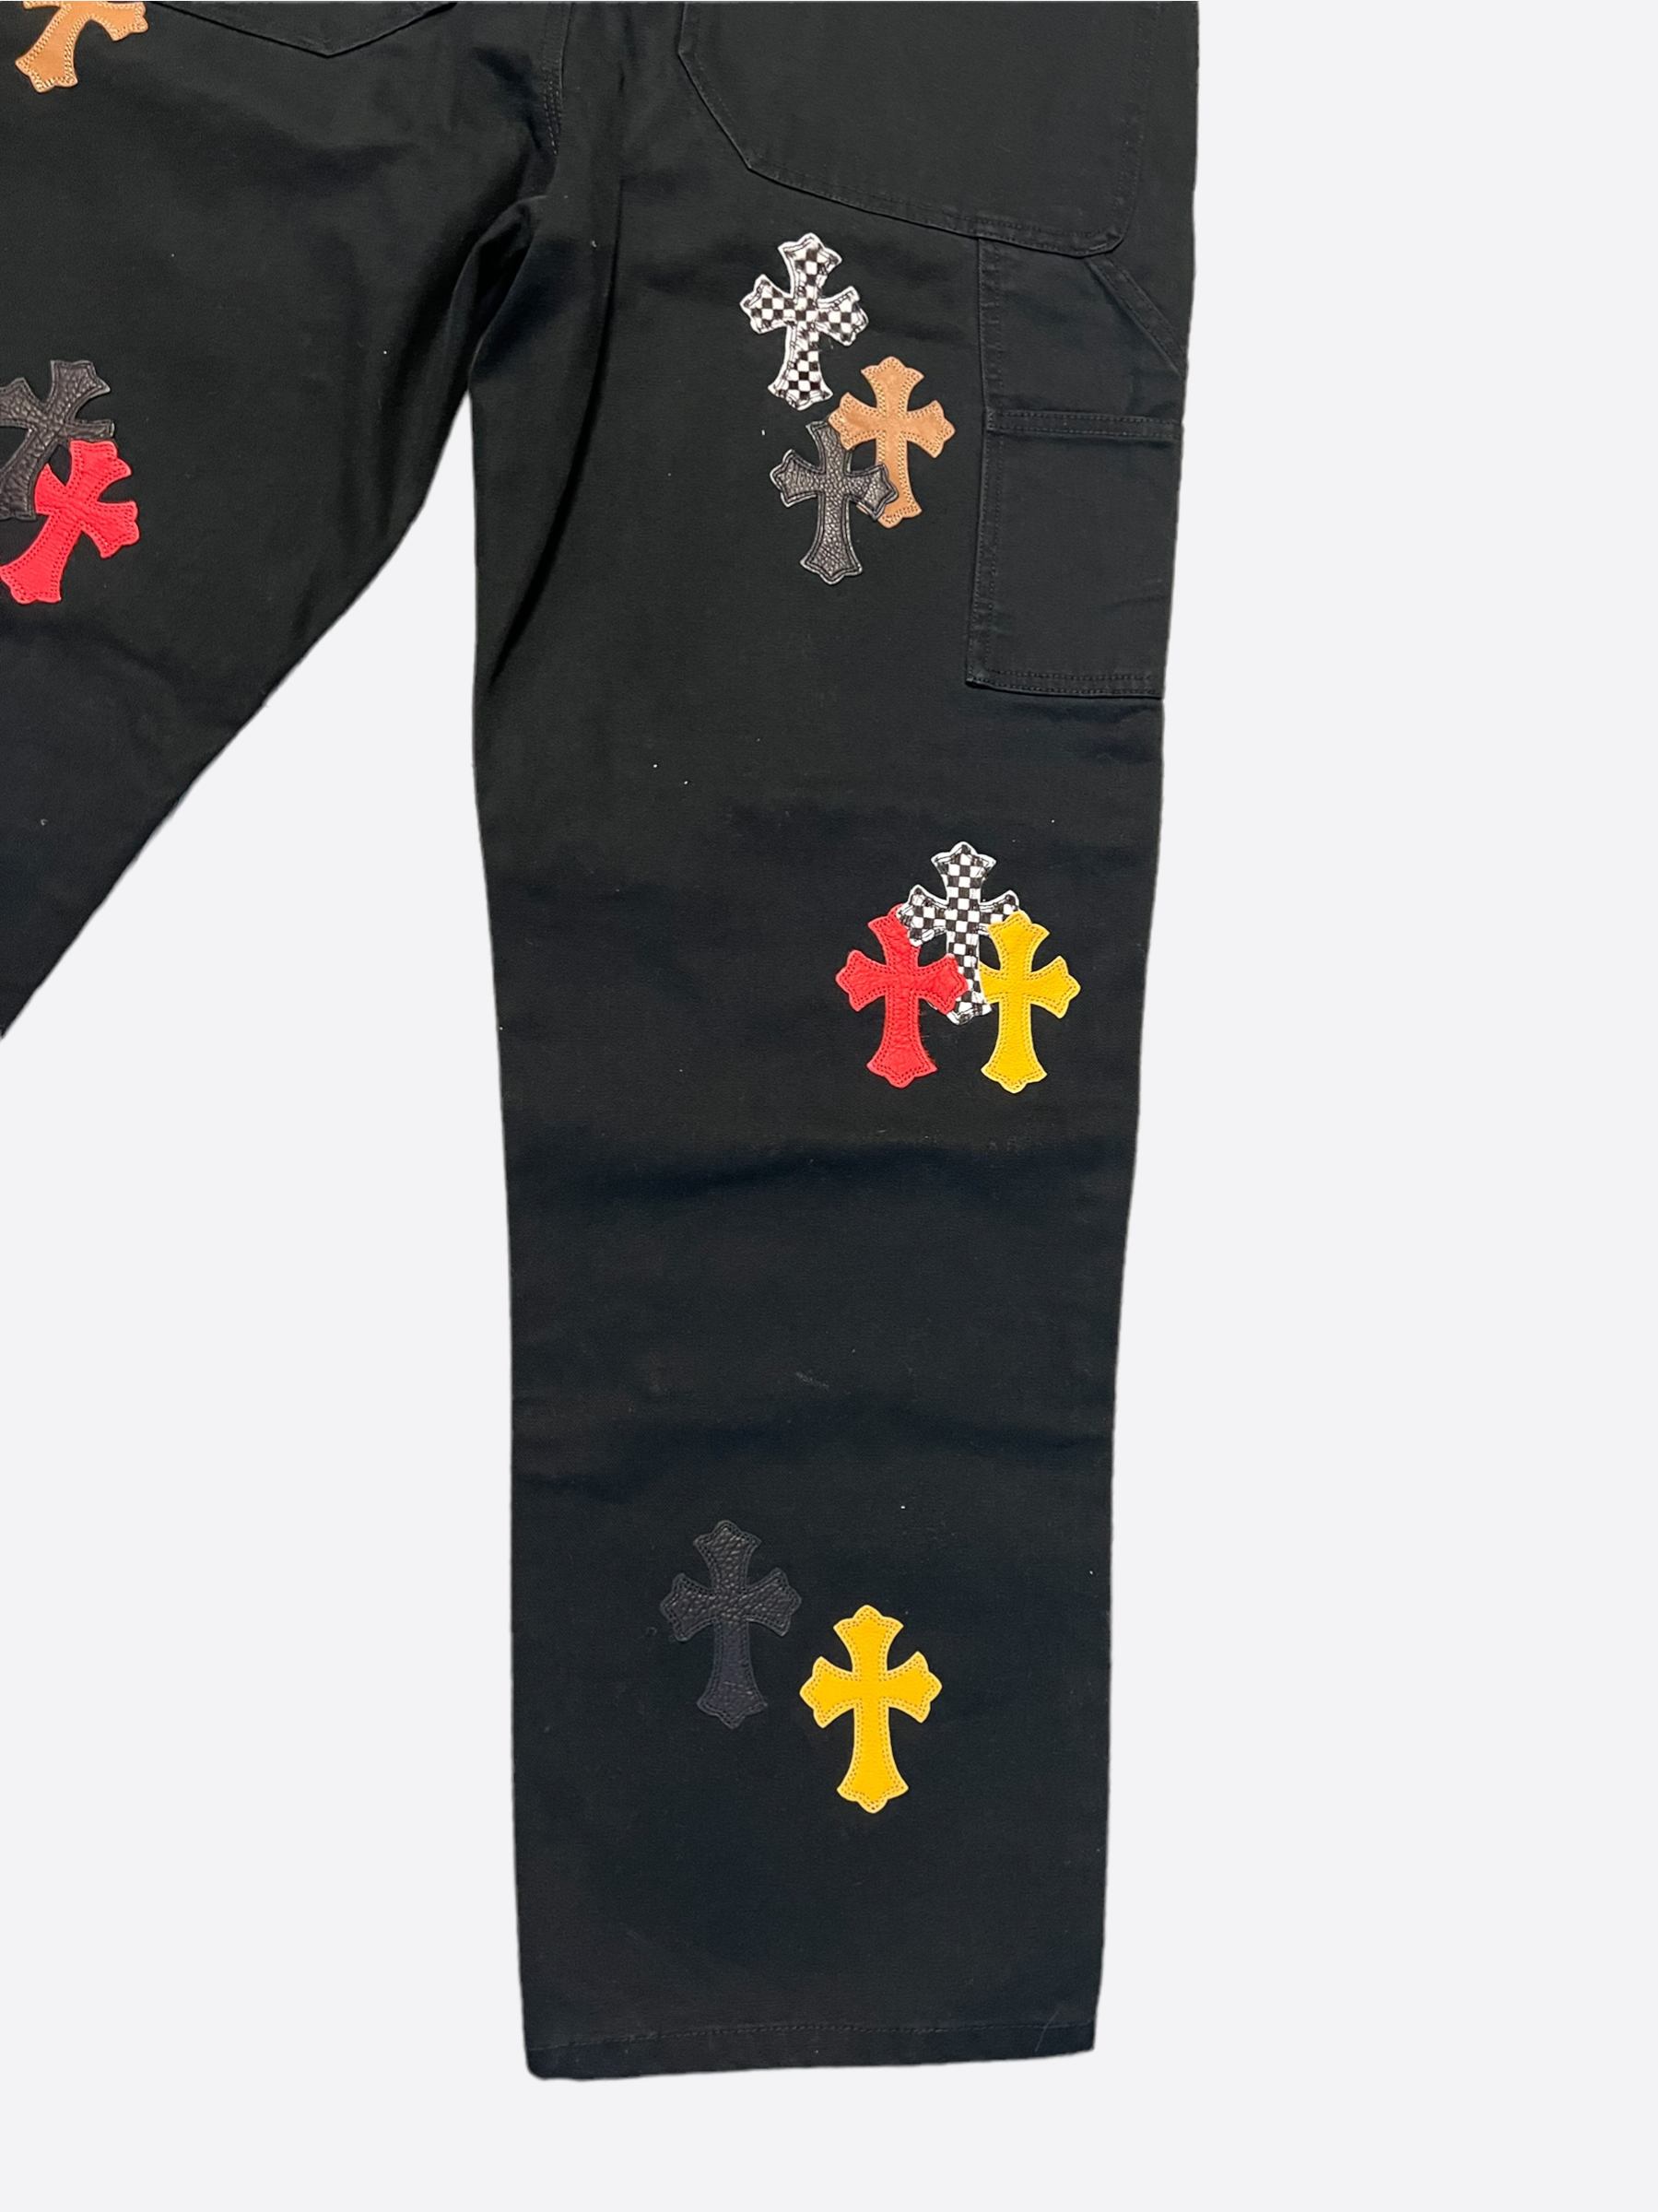 Very Rare Chrome Hearts Jeans Available Now! Black Gold Crosses